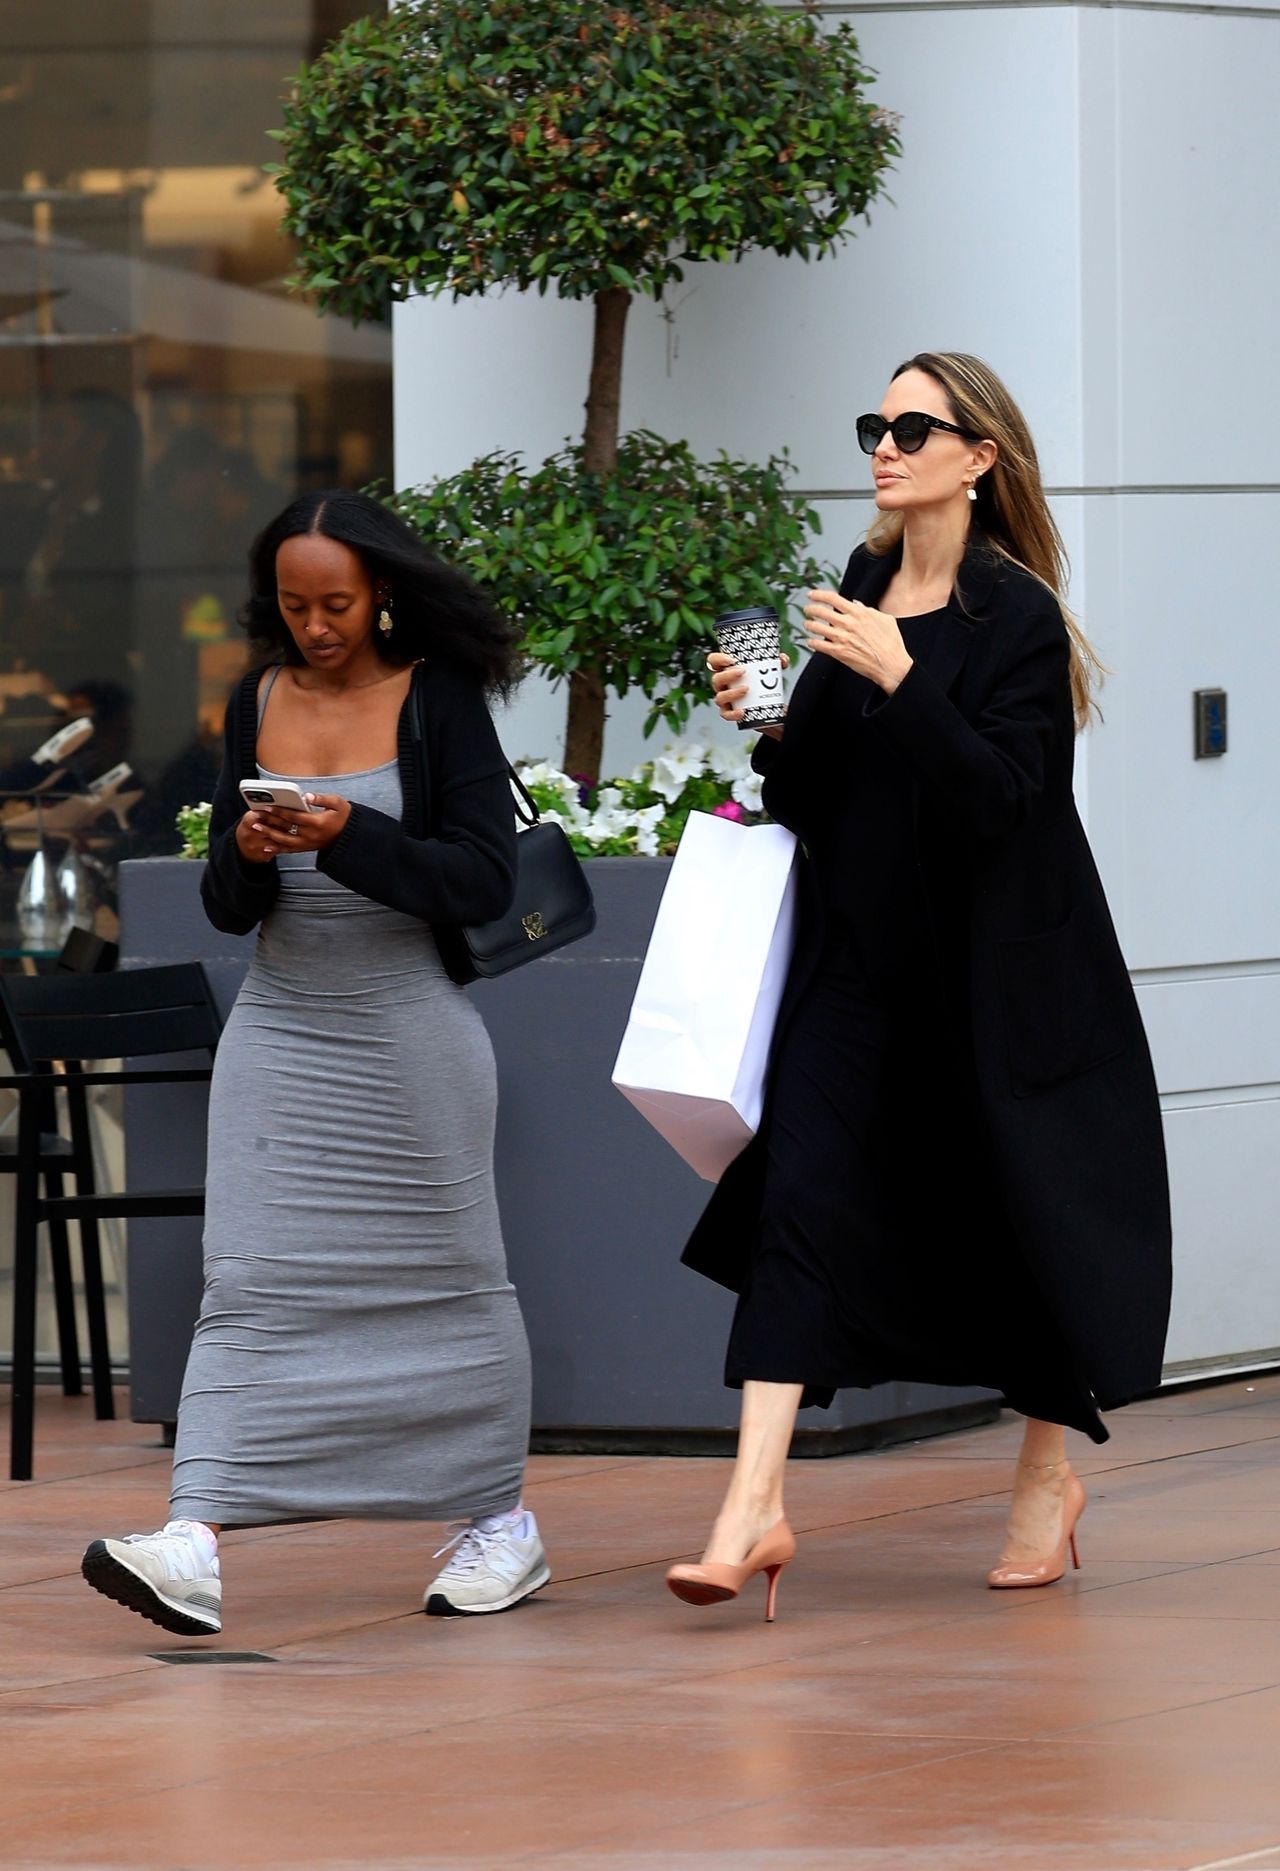 Angelina Jolie "spotted" in town with her daughter